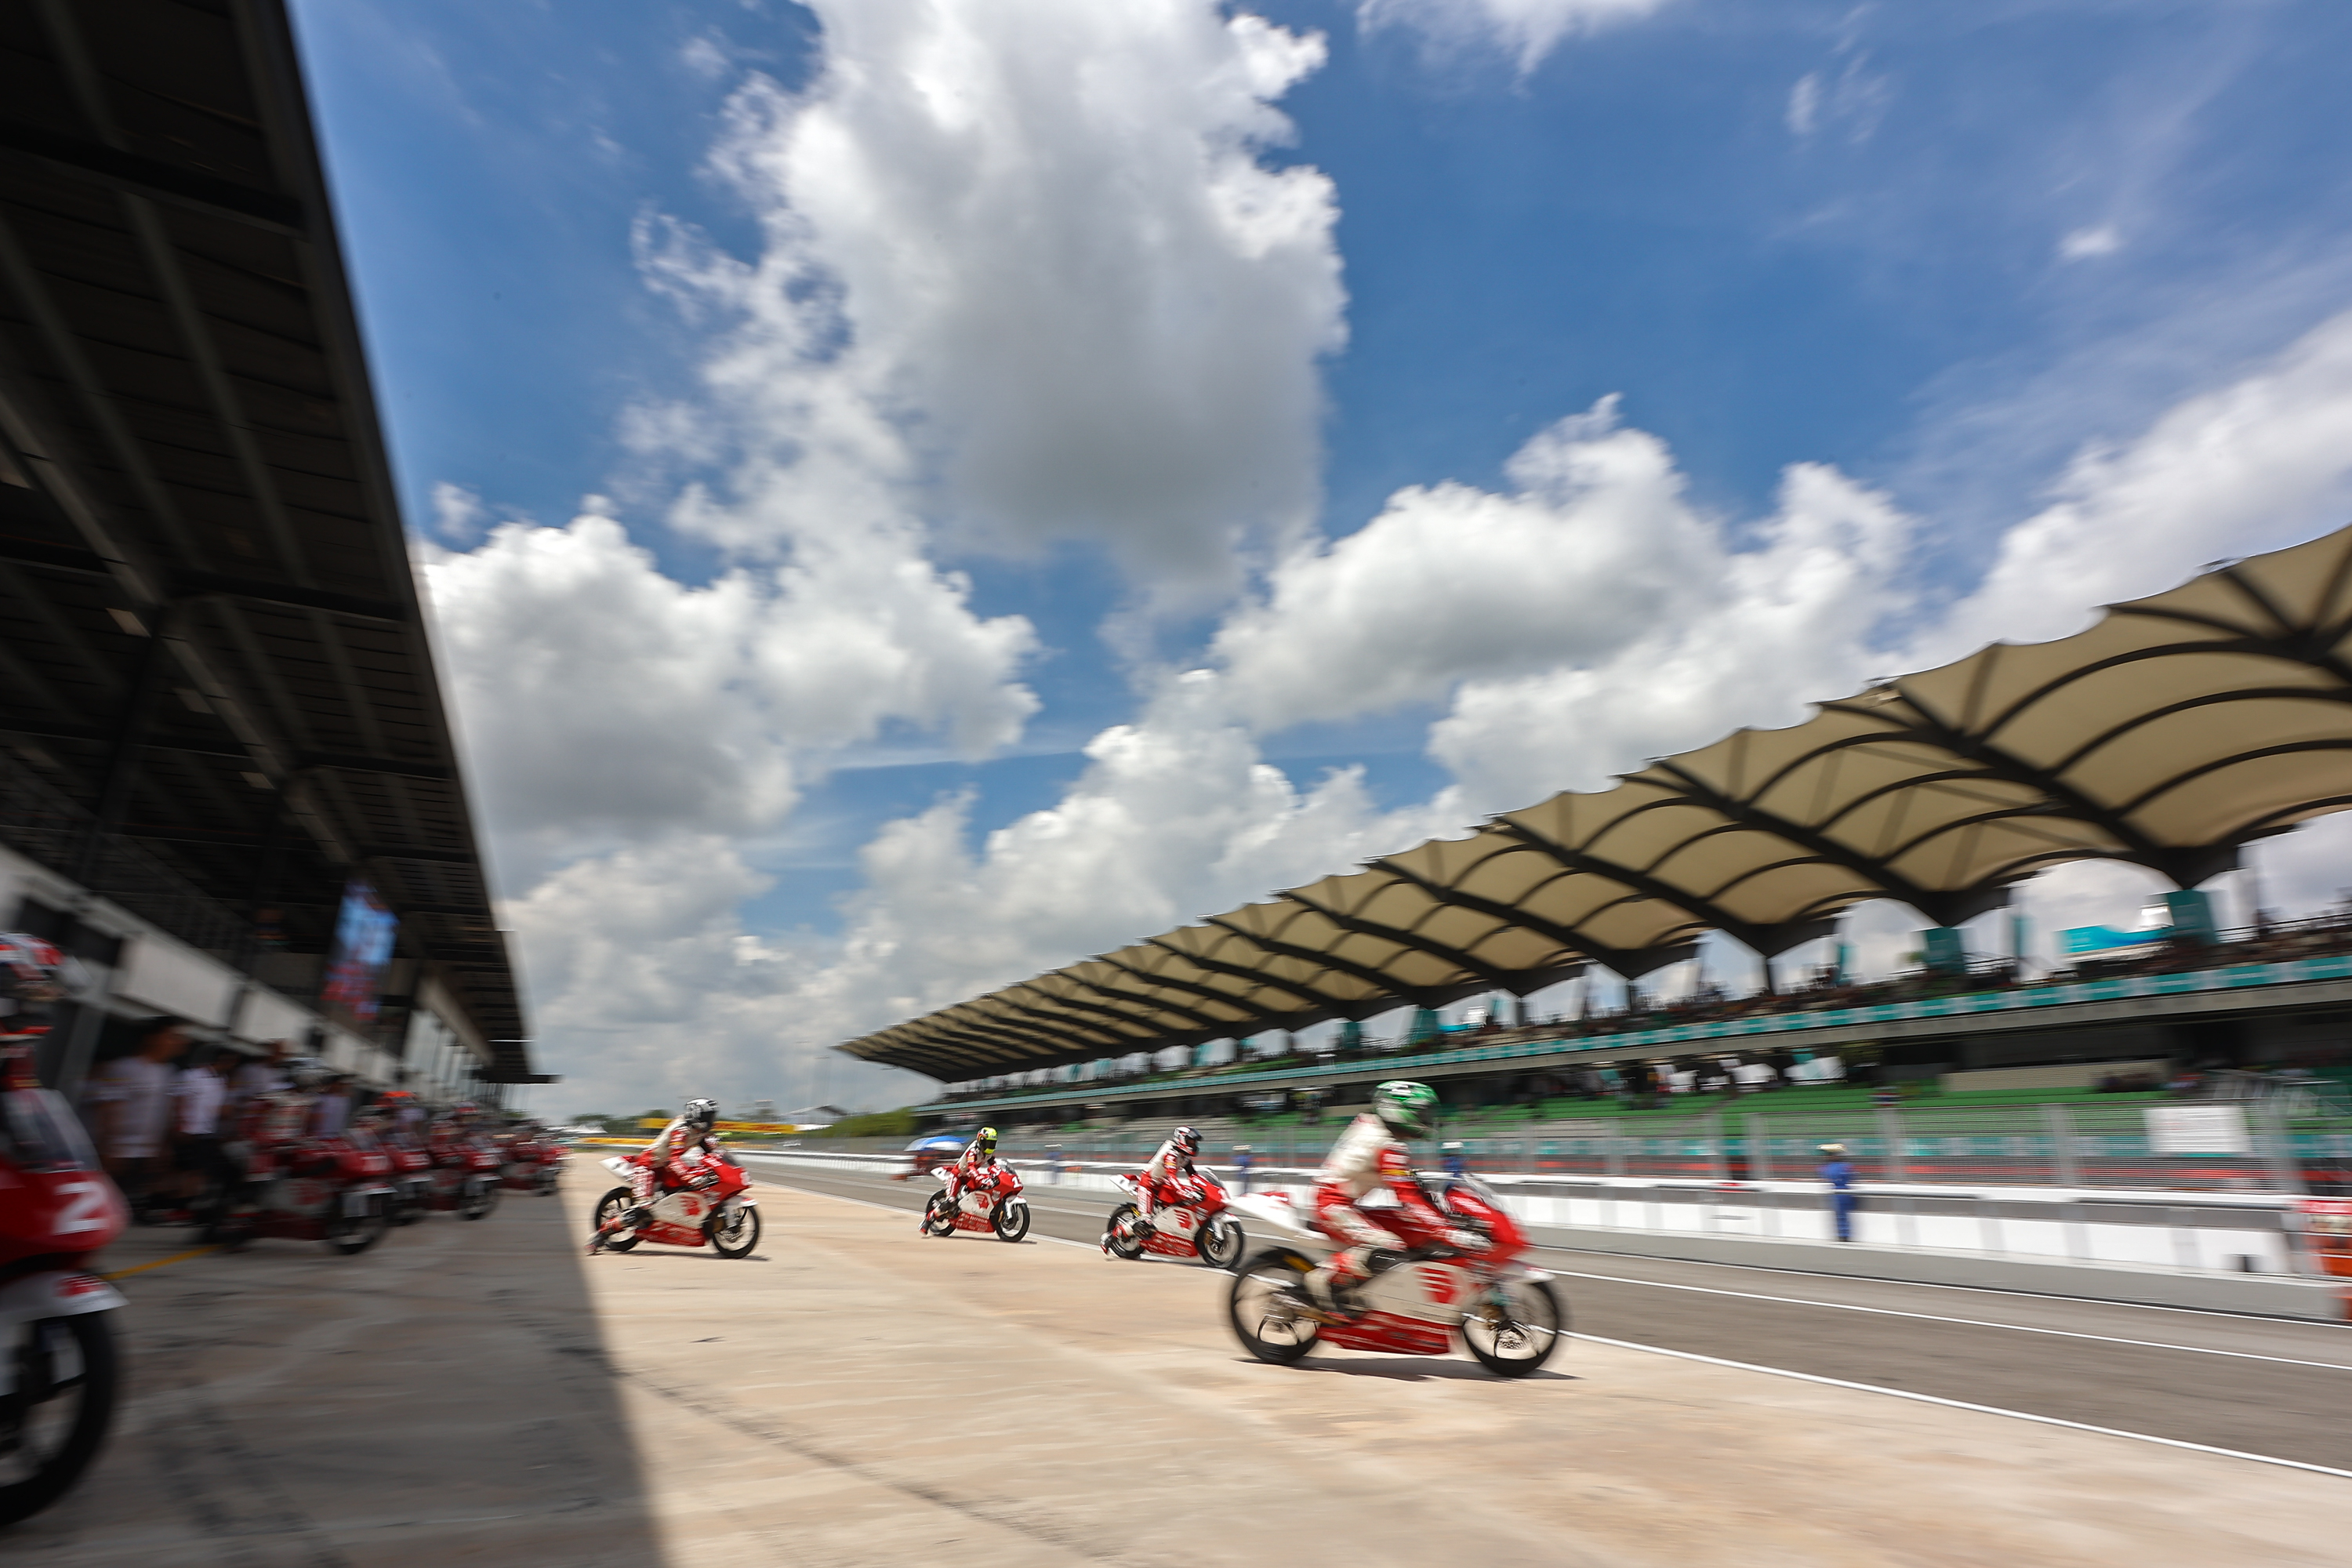 Qualifying Practice Backstage | Round 5 Malaysia | 2023 Idemitsu Asia Talent Cup